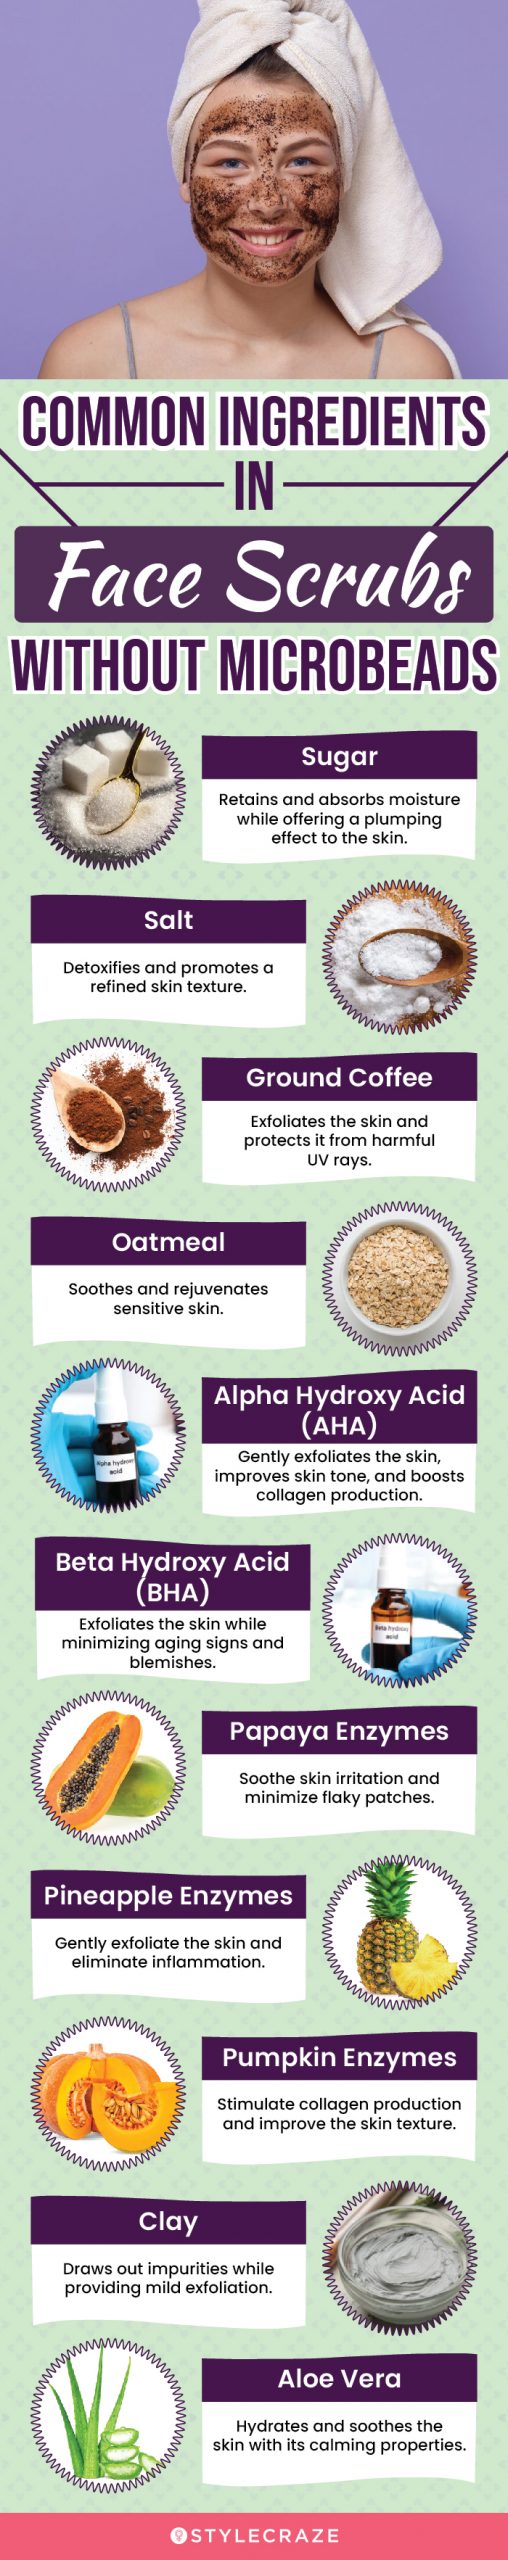 Common Ingredients In Face Scrubs Without Microbeads (infographic)